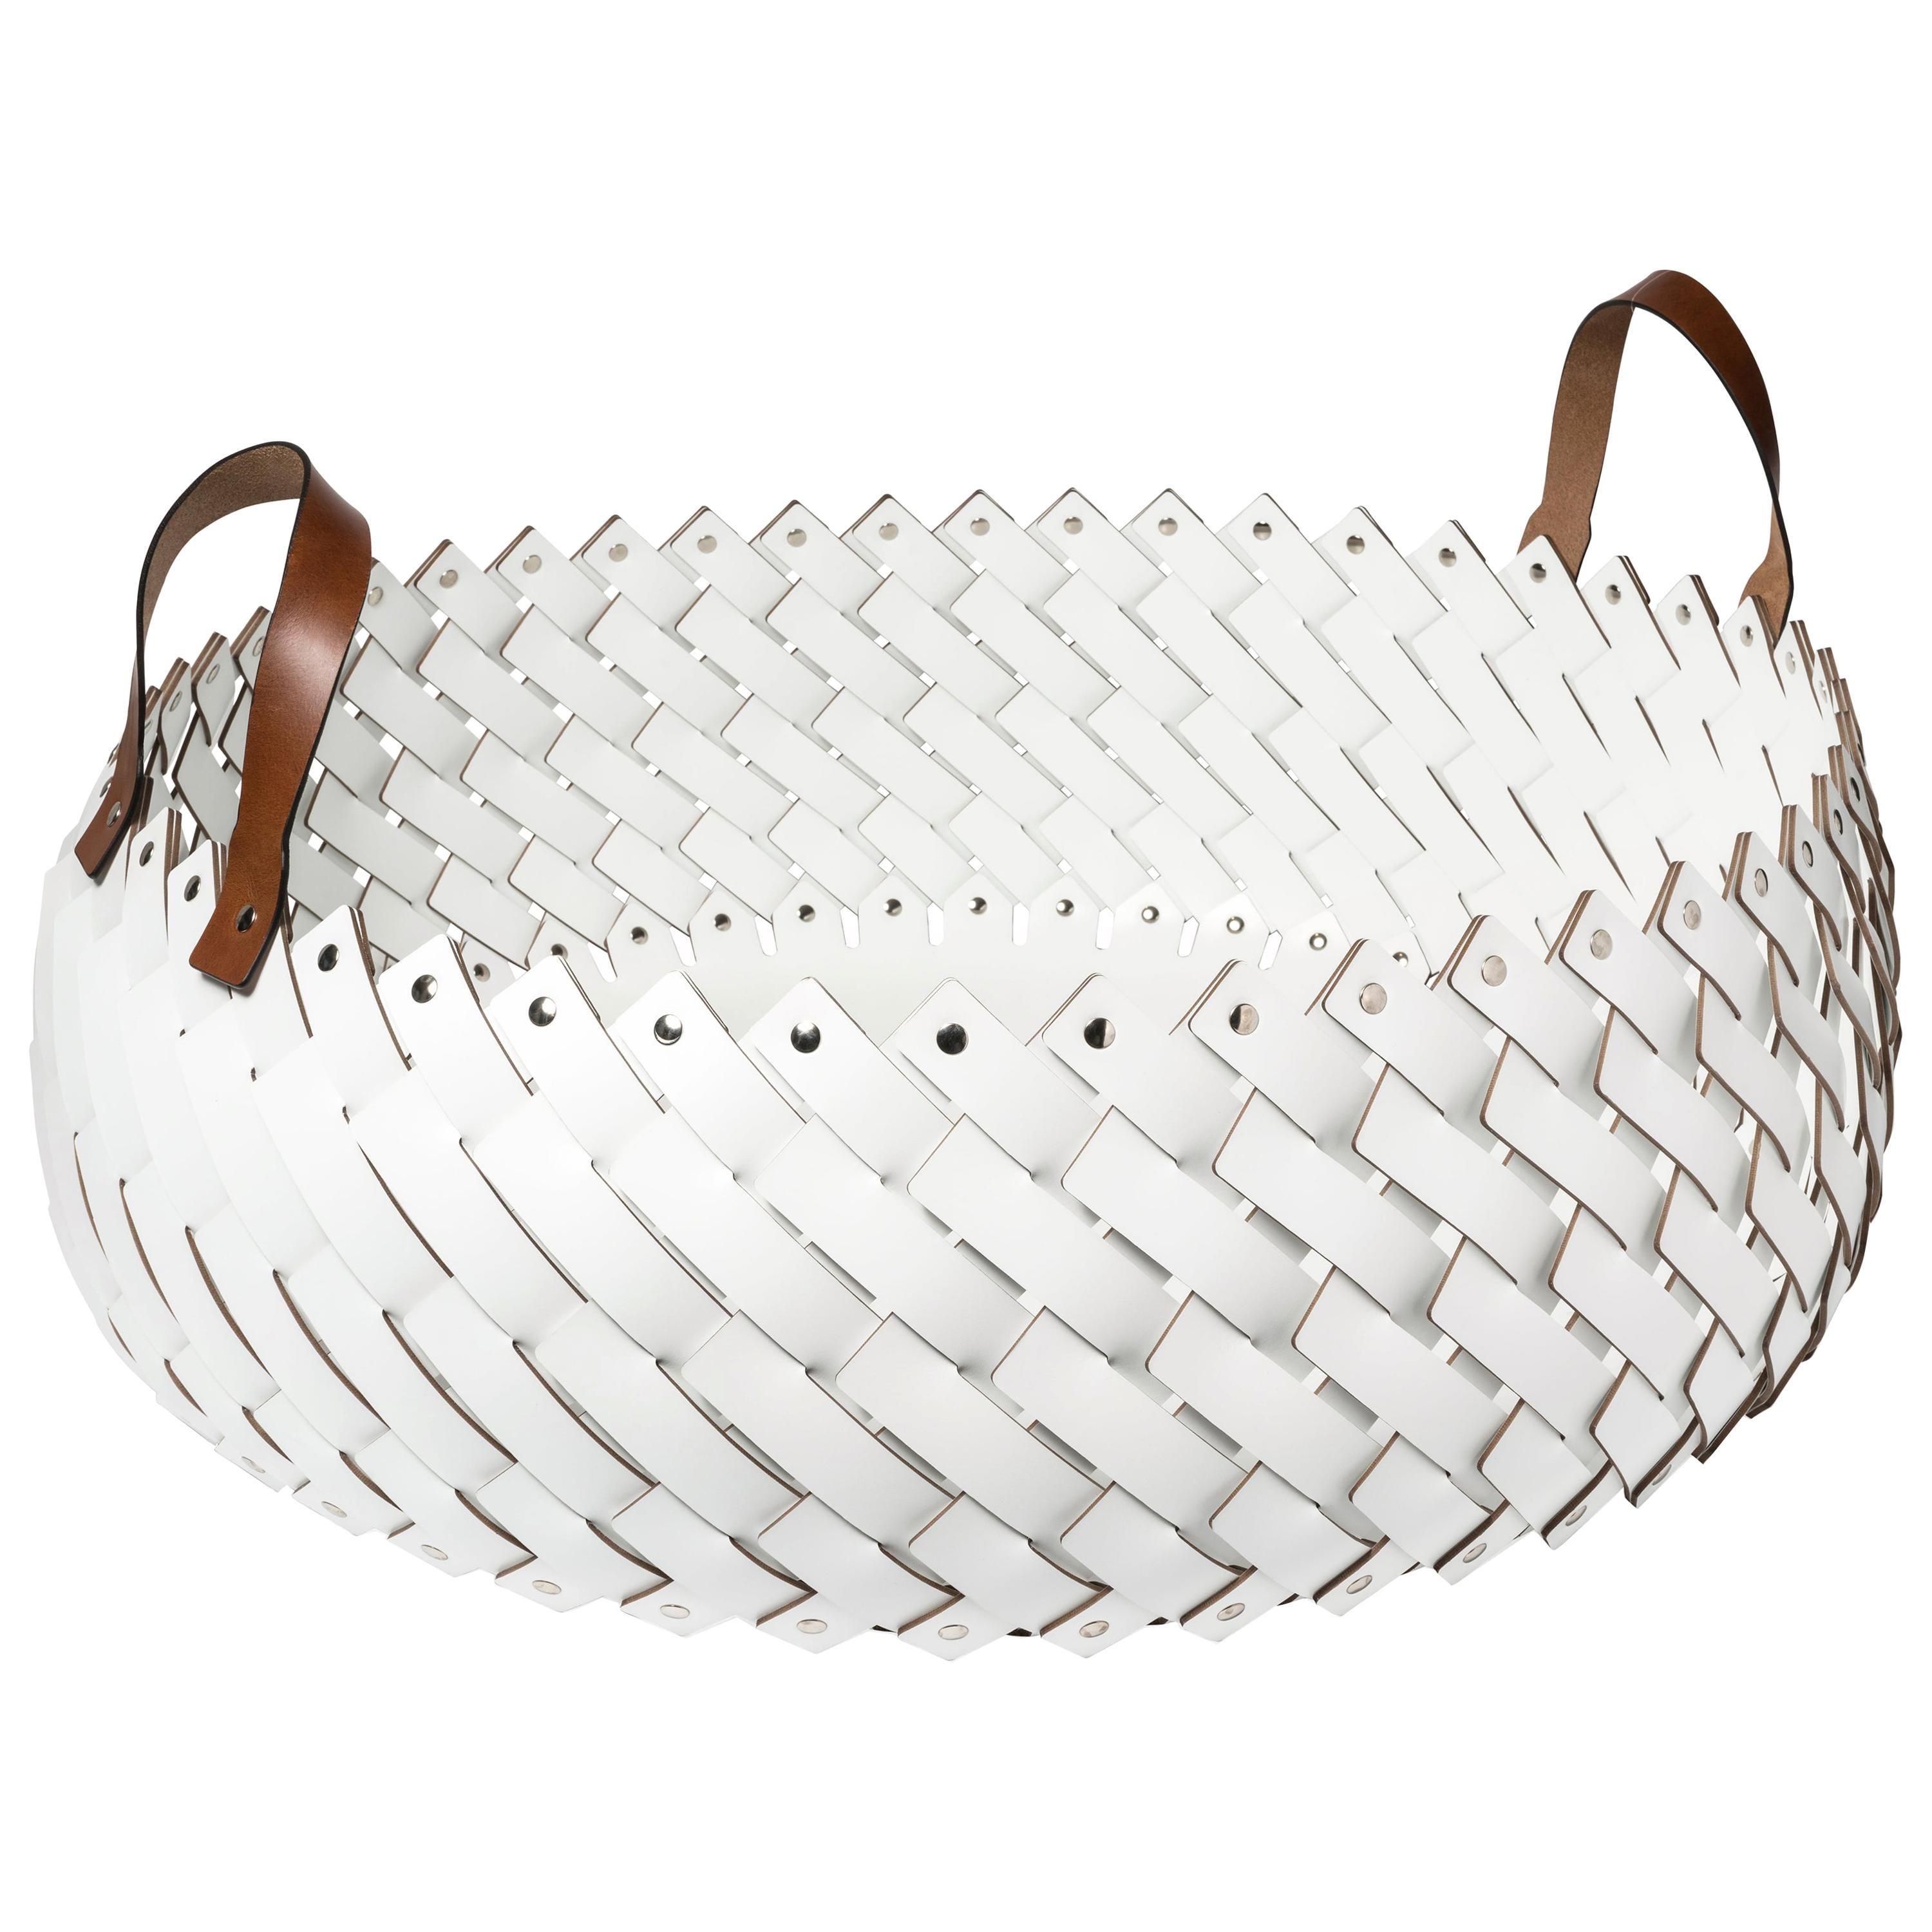  ( For Sophia ) Contemporary White Woven Leather Almeria Basket with Handles